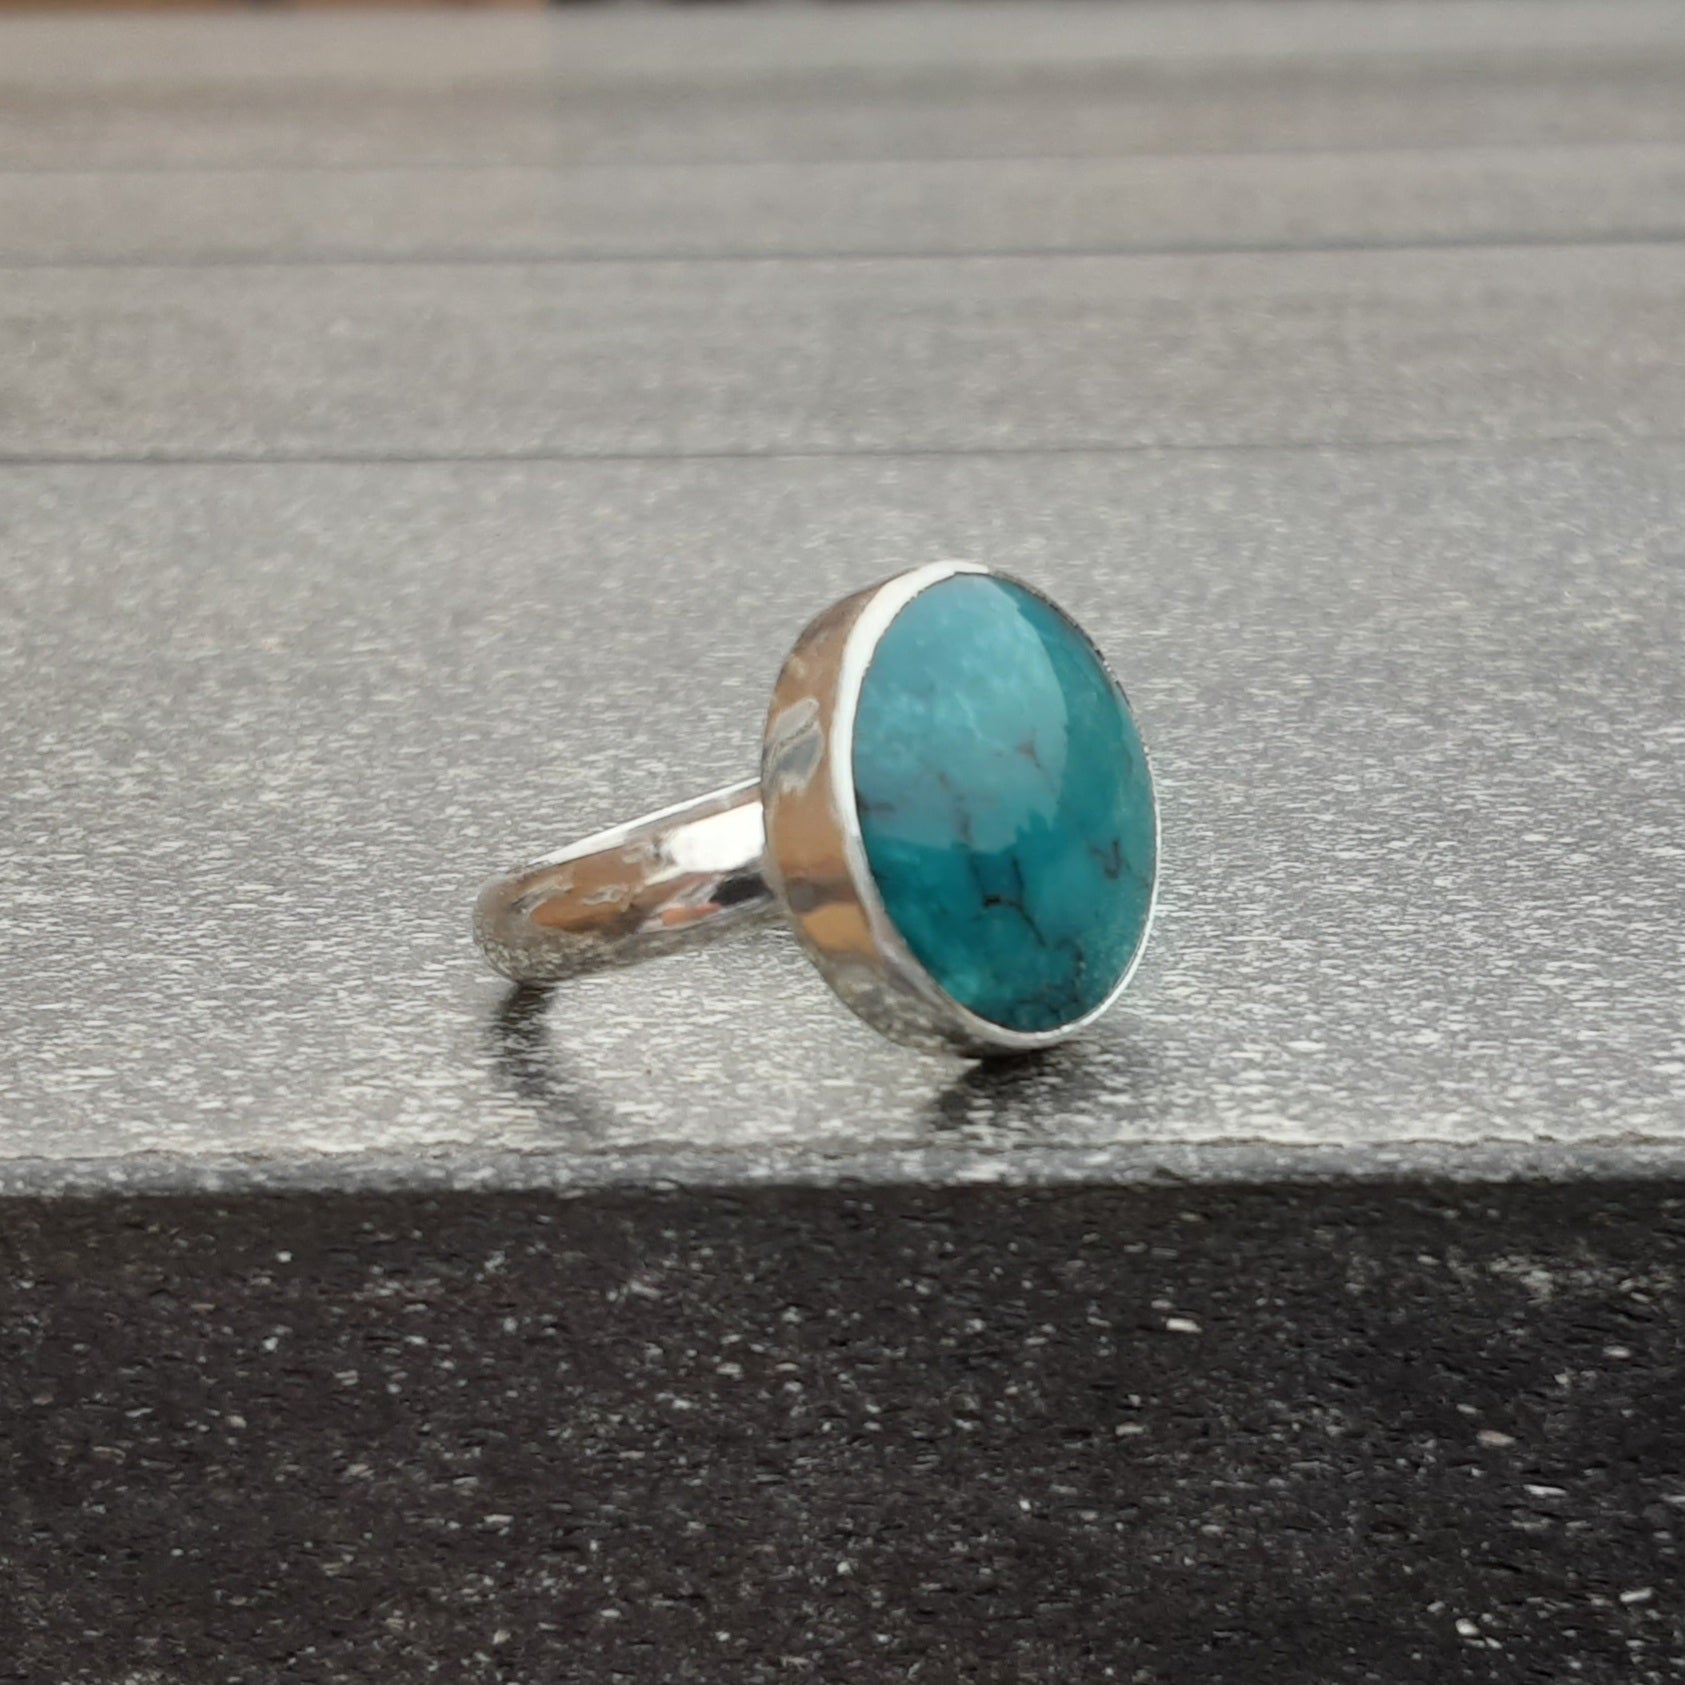 Yungai Turquoise and Sterling Silver Ring